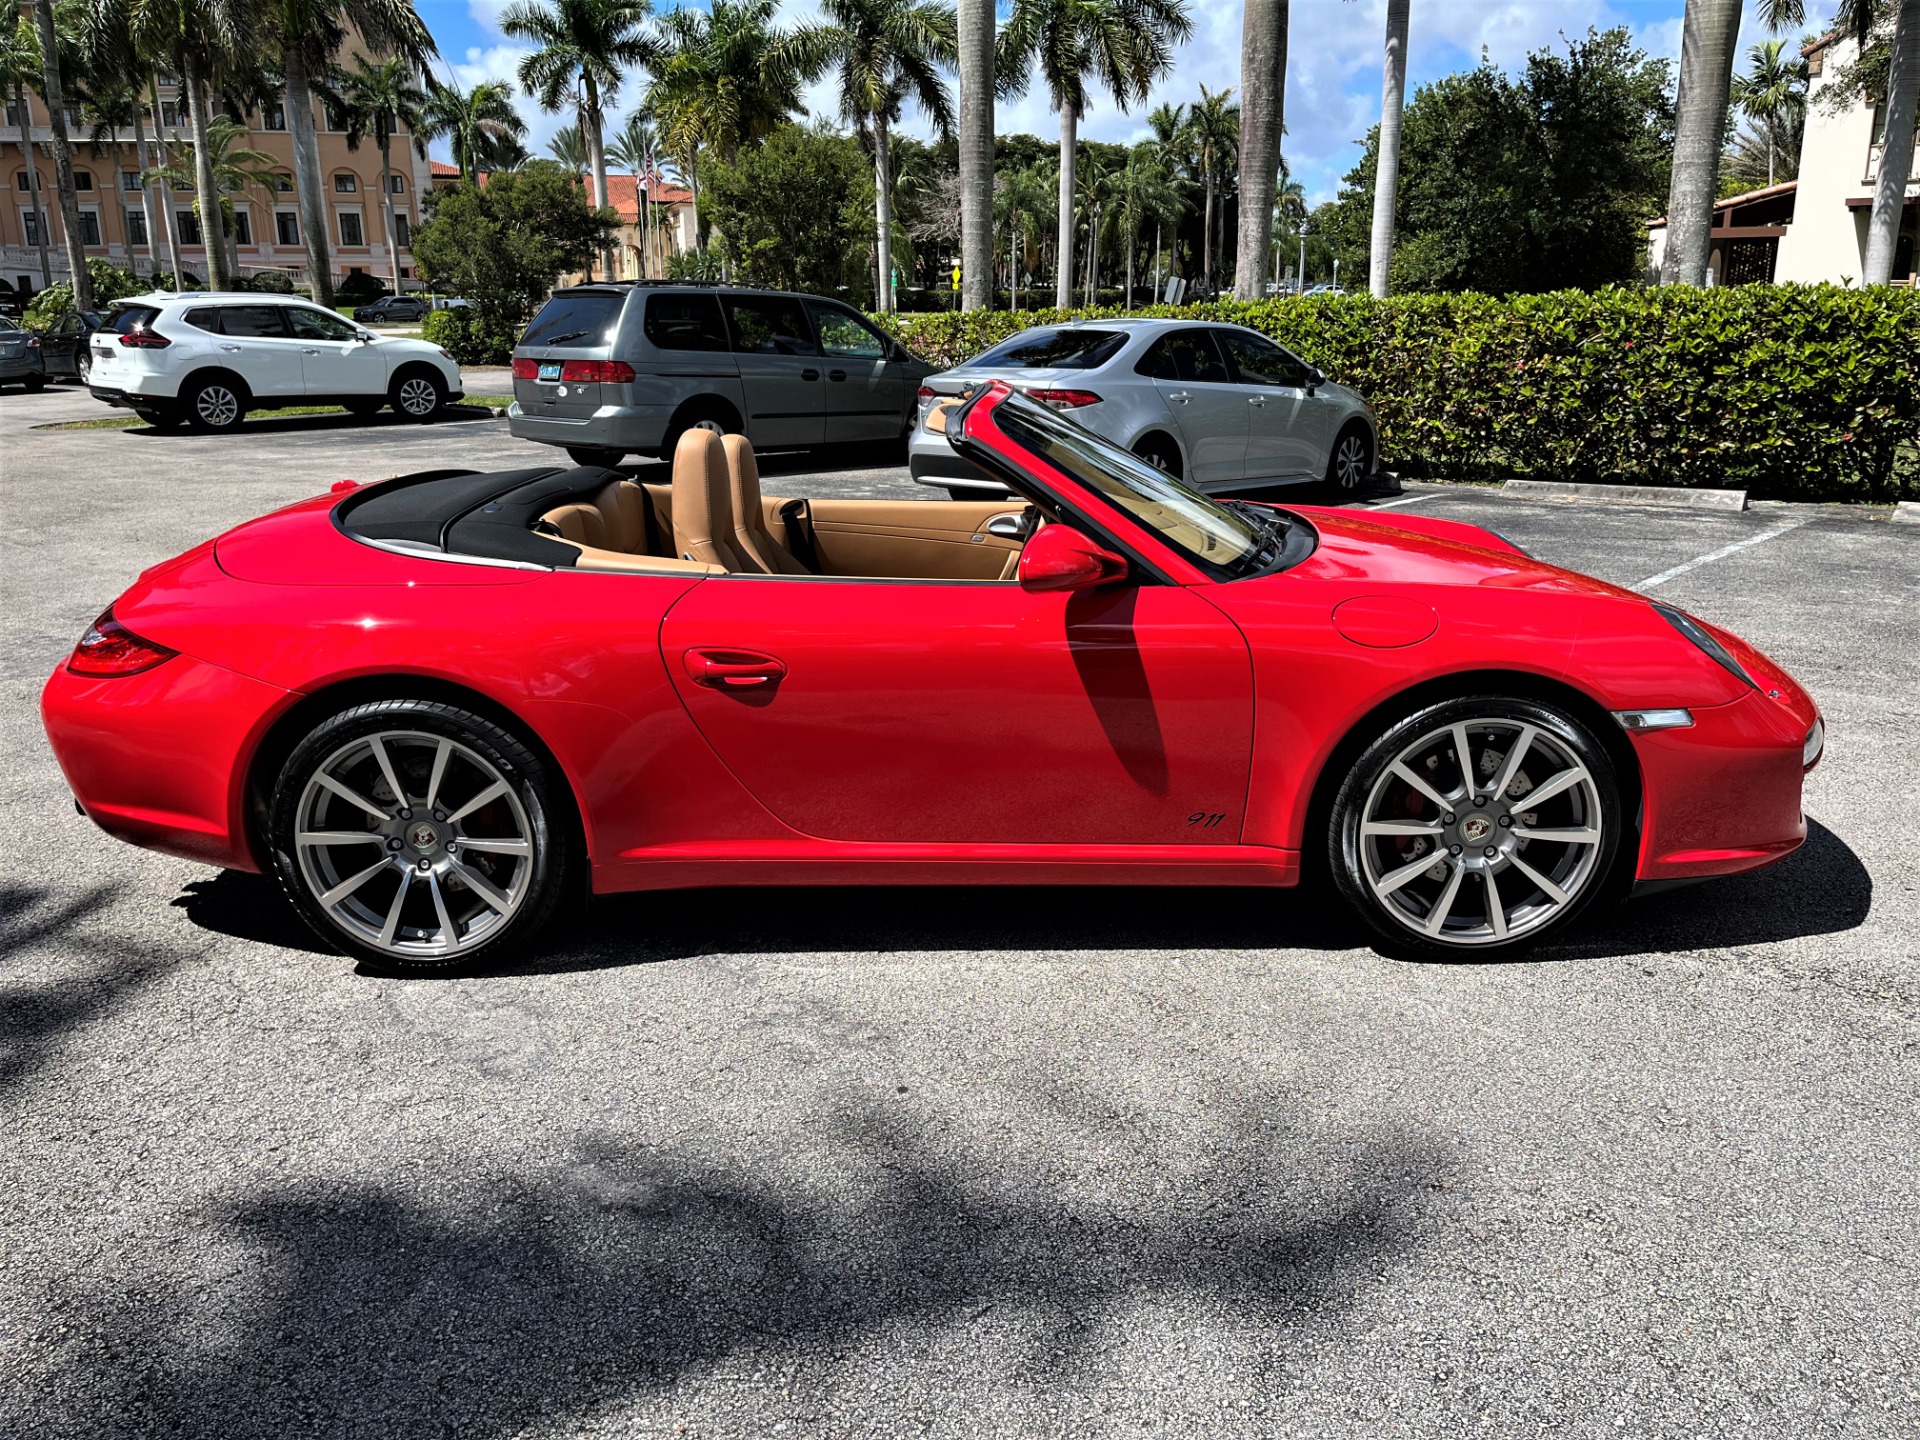 Used 2012 Porsche 911 Carrera for sale Sold at The Gables Sports Cars in Miami FL 33146 4